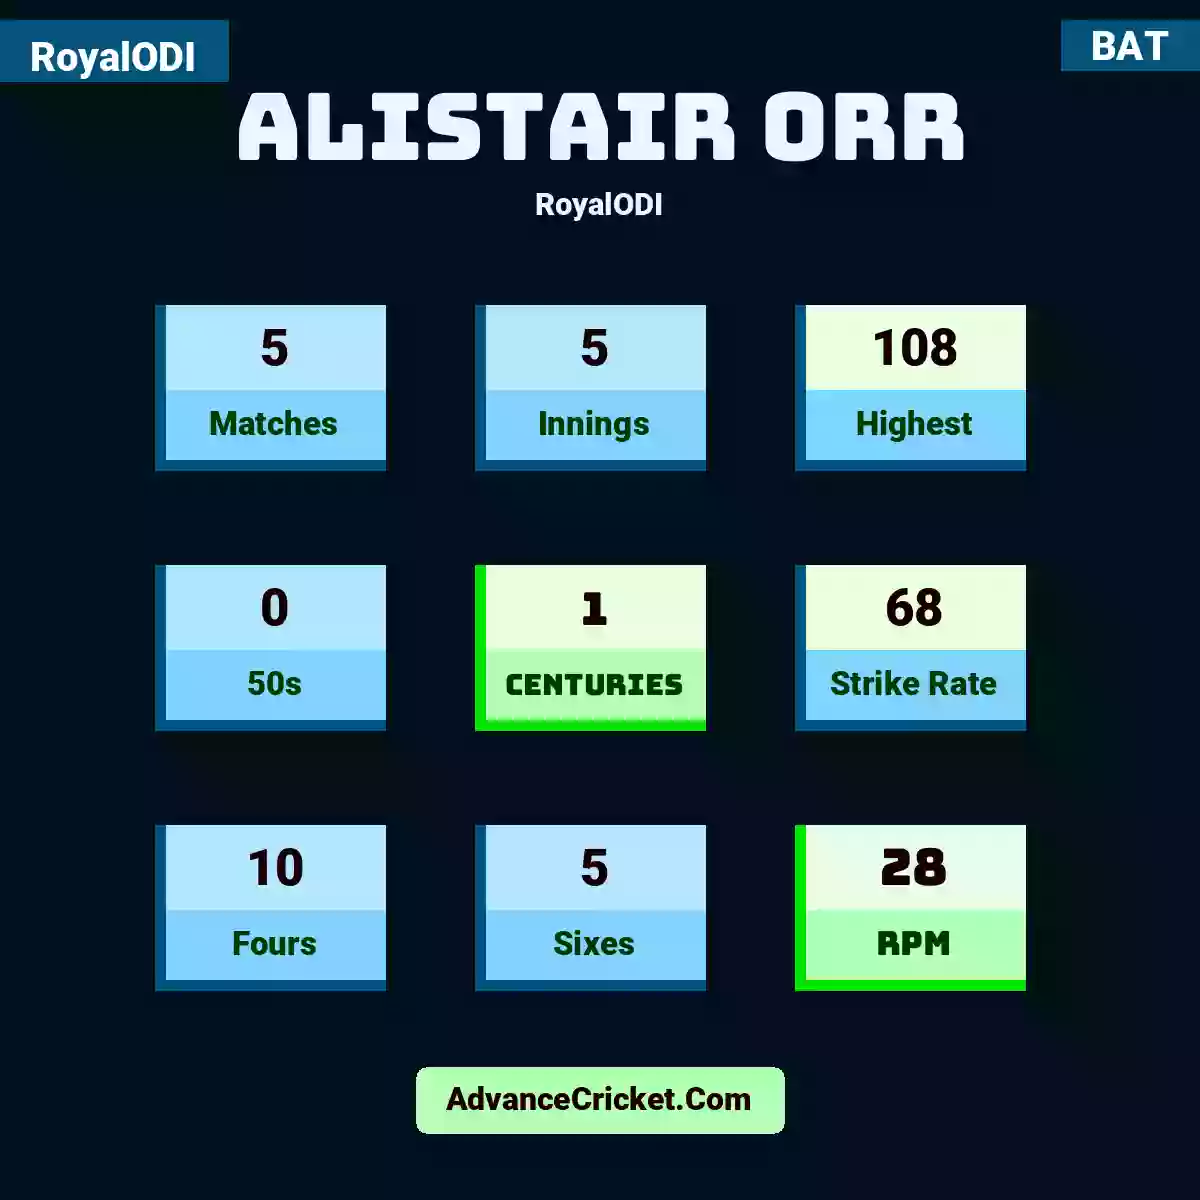 Alistair Orr RoyalODI , Alistair Orr played 5 matches, scored 108 runs as highest, 0 half-centuries, and 1 centuries, with a strike rate of 68. A.Orr hit 10 fours and 5 sixes, with an RPM of 28.